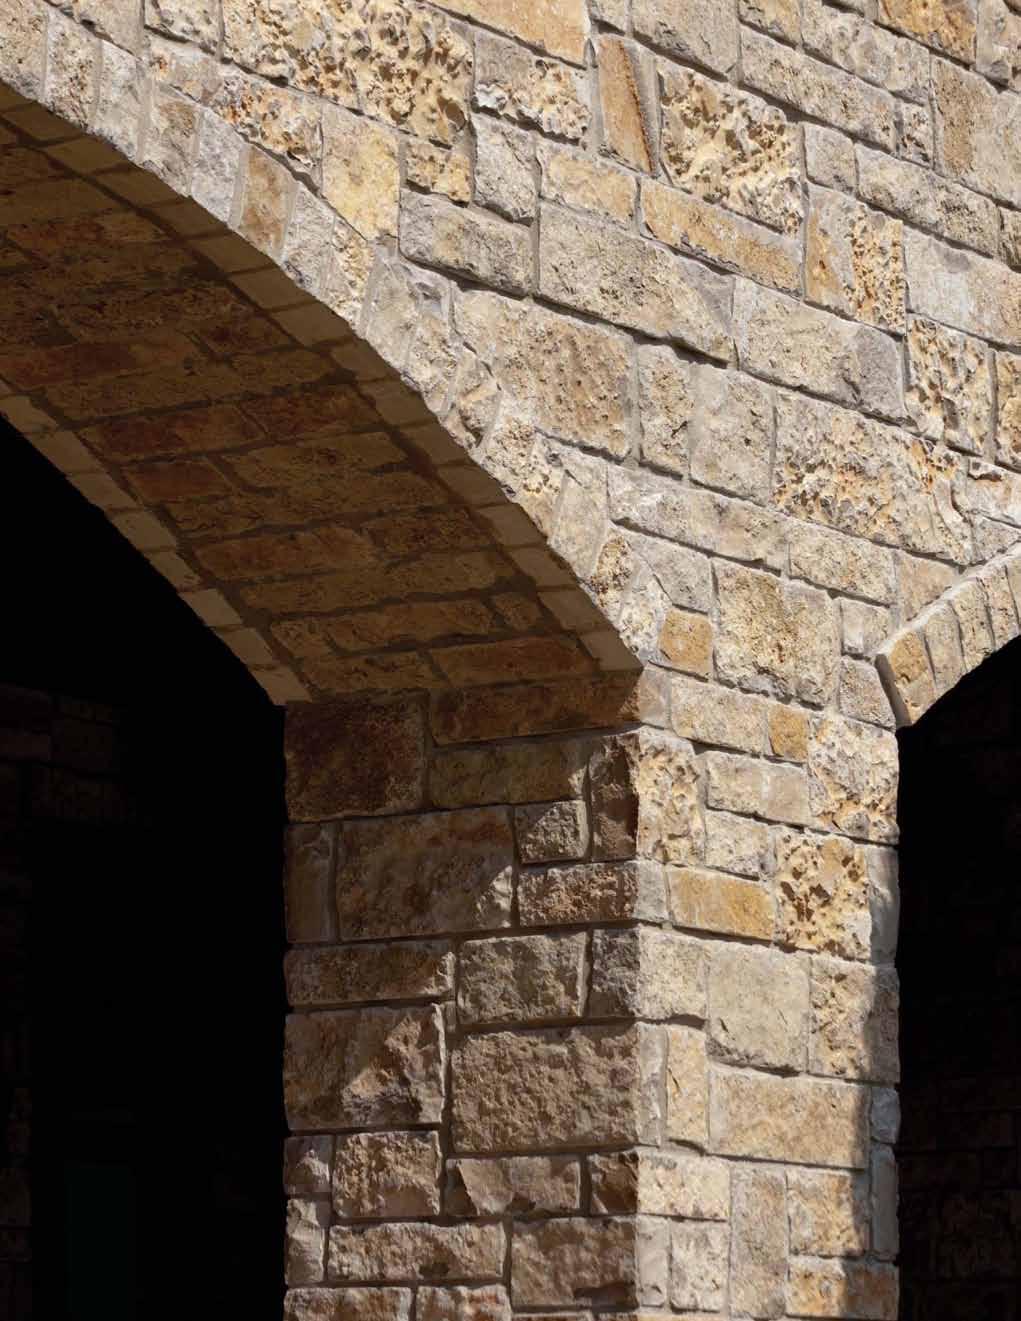 Acme Natural Stone Selection Guide The Acme Natural Stone collection offers a spectrum of stone blends that